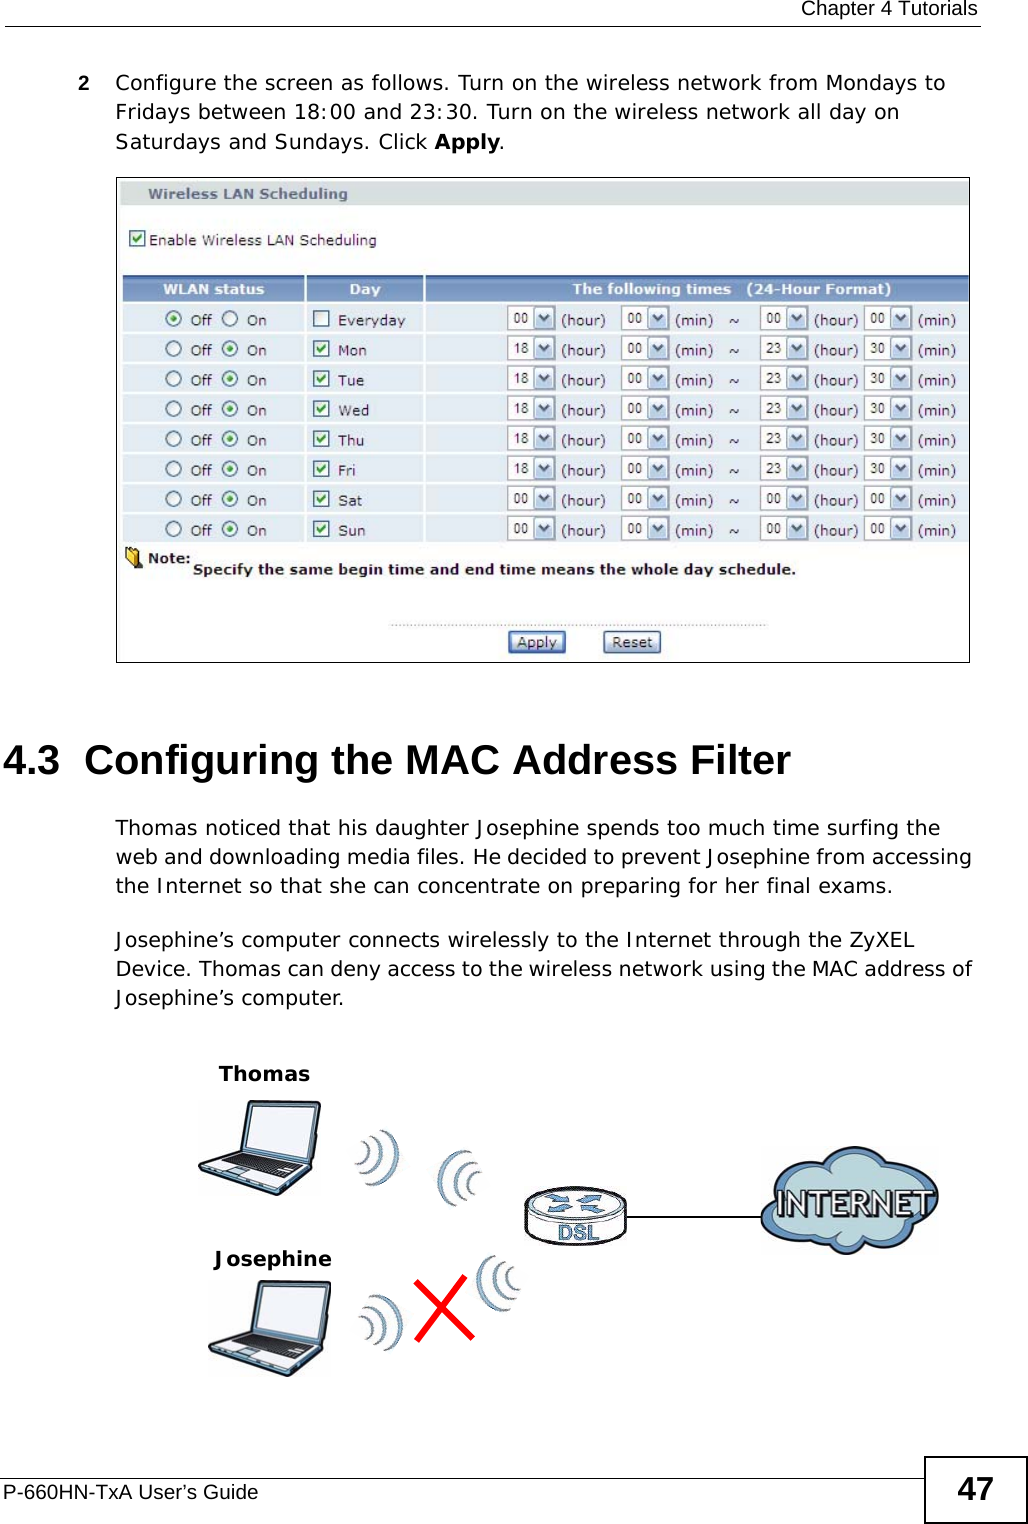  Chapter 4 TutorialsP-660HN-TxA User’s Guide 472Configure the screen as follows. Turn on the wireless network from Mondays to Fridays between 18:00 and 23:30. Turn on the wireless network all day on Saturdays and Sundays. Click Apply.4.3  Configuring the MAC Address FilterThomas noticed that his daughter Josephine spends too much time surfing the web and downloading media files. He decided to prevent Josephine from accessing the Internet so that she can concentrate on preparing for her final exams.Josephine’s computer connects wirelessly to the Internet through the ZyXEL Device. Thomas can deny access to the wireless network using the MAC address of Josephine’s computer.ThomasJosephine